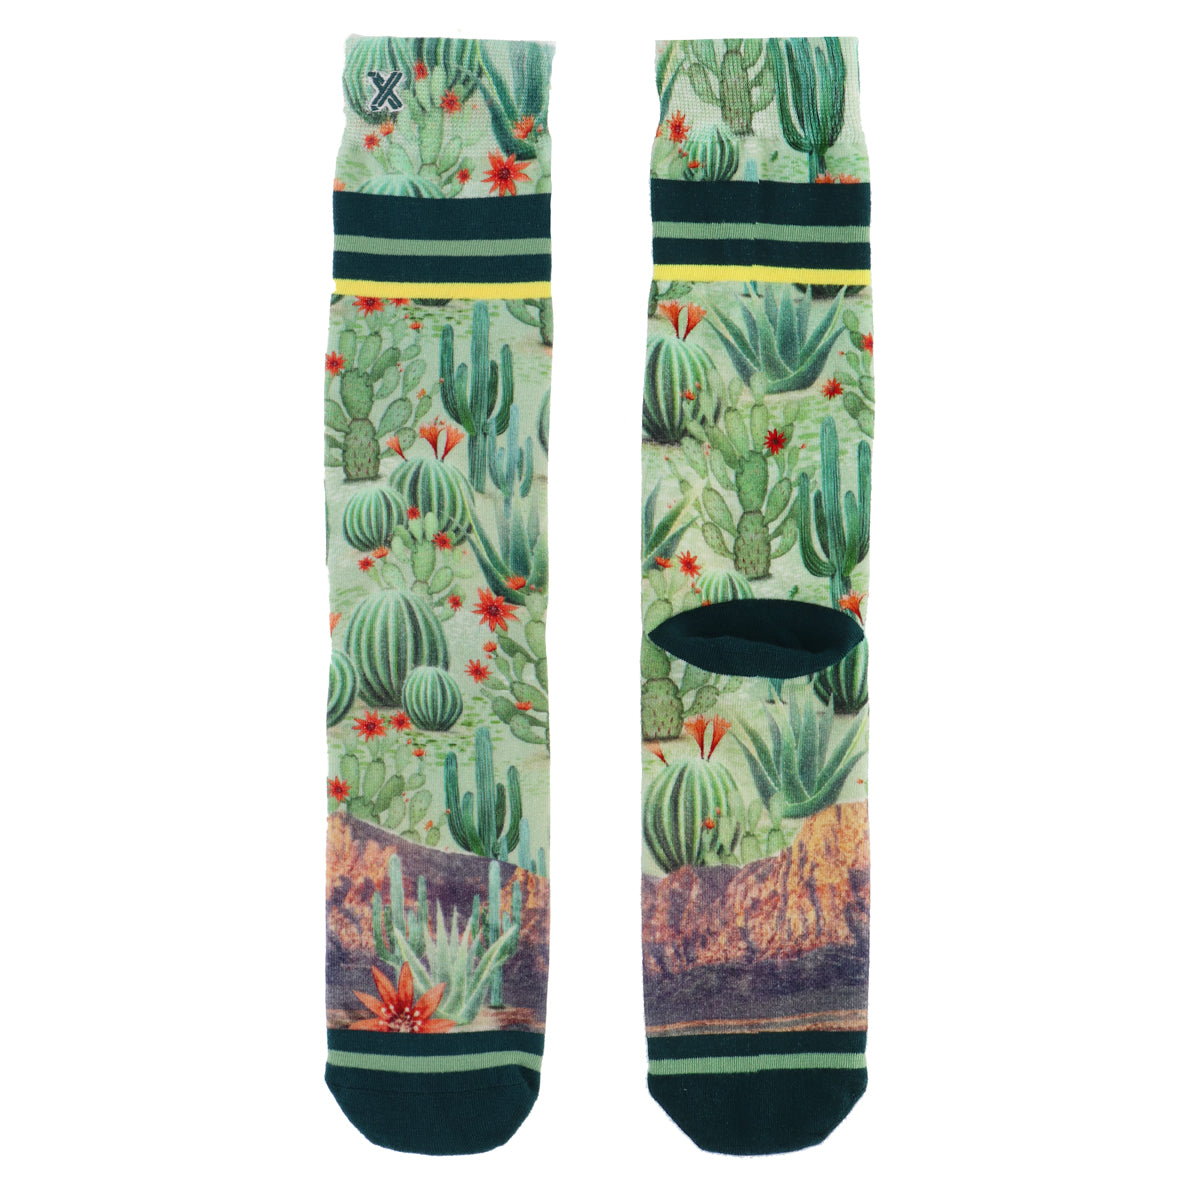 Xpooos & ADNF Cactus Bamboo Men's chaussettes pour hommes